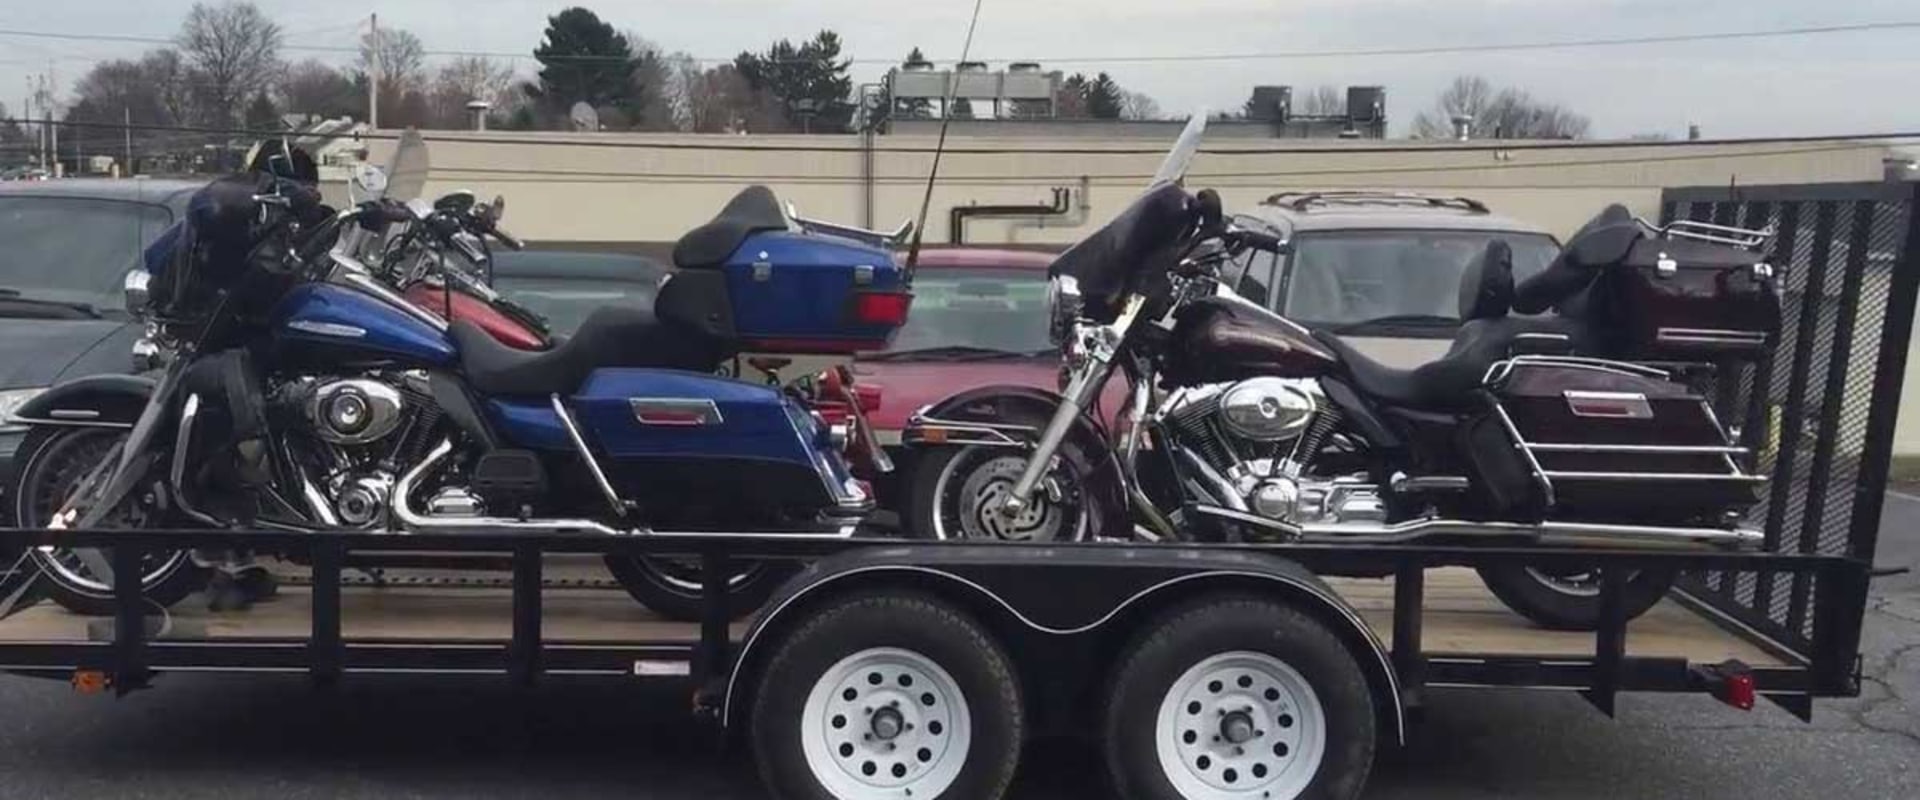 Can i ship my motorcycle with other vehicles in the same shipment?